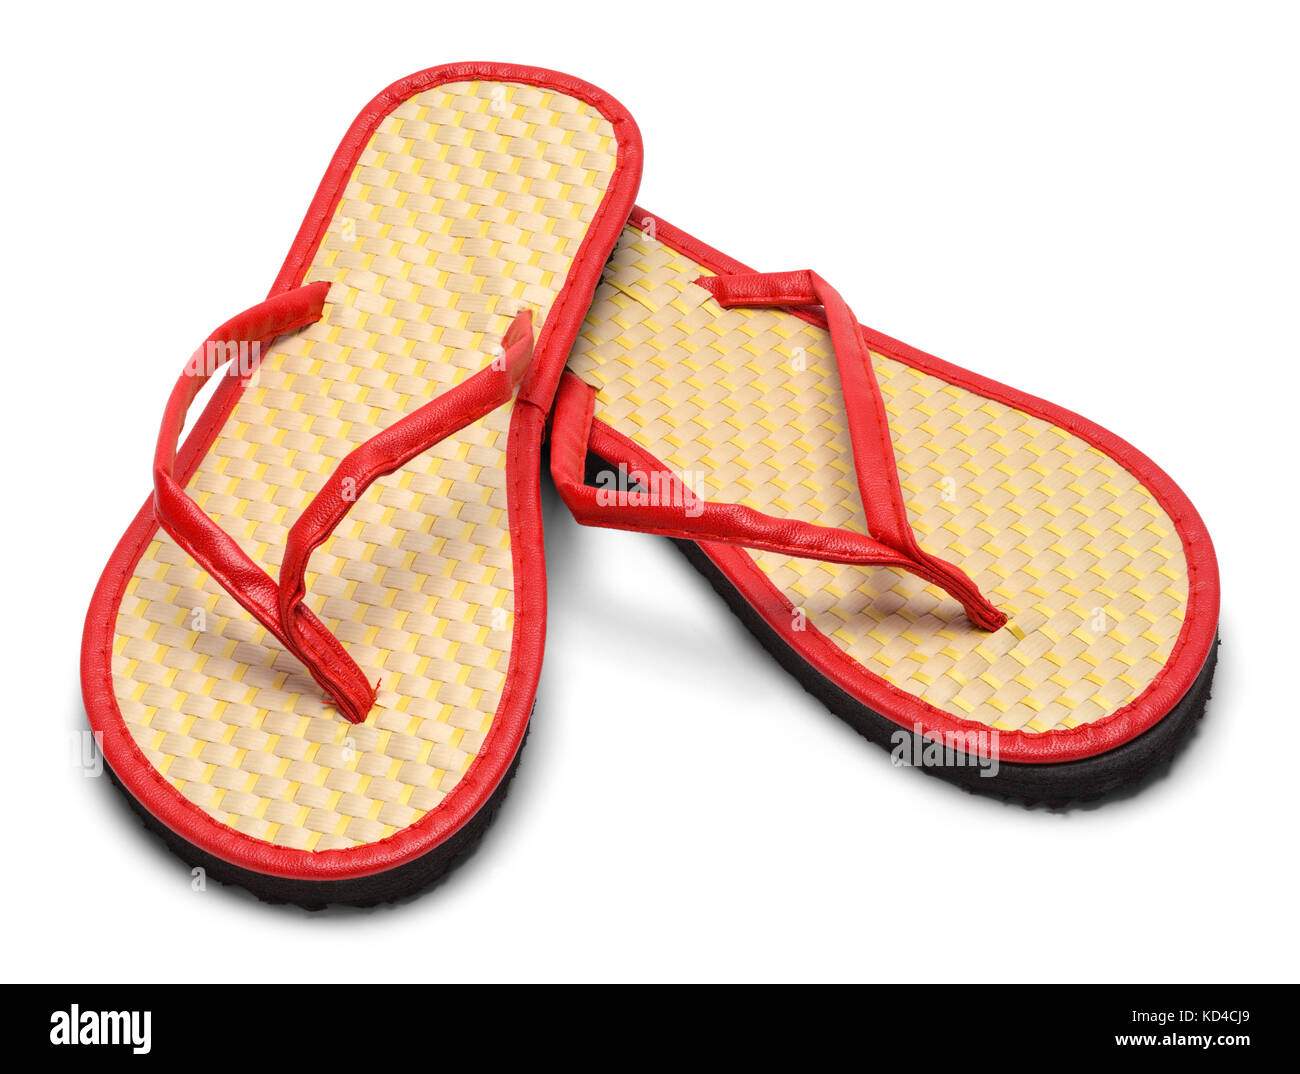 Pair of woven Flip Flops Isolated on a White Background. Stock Photo